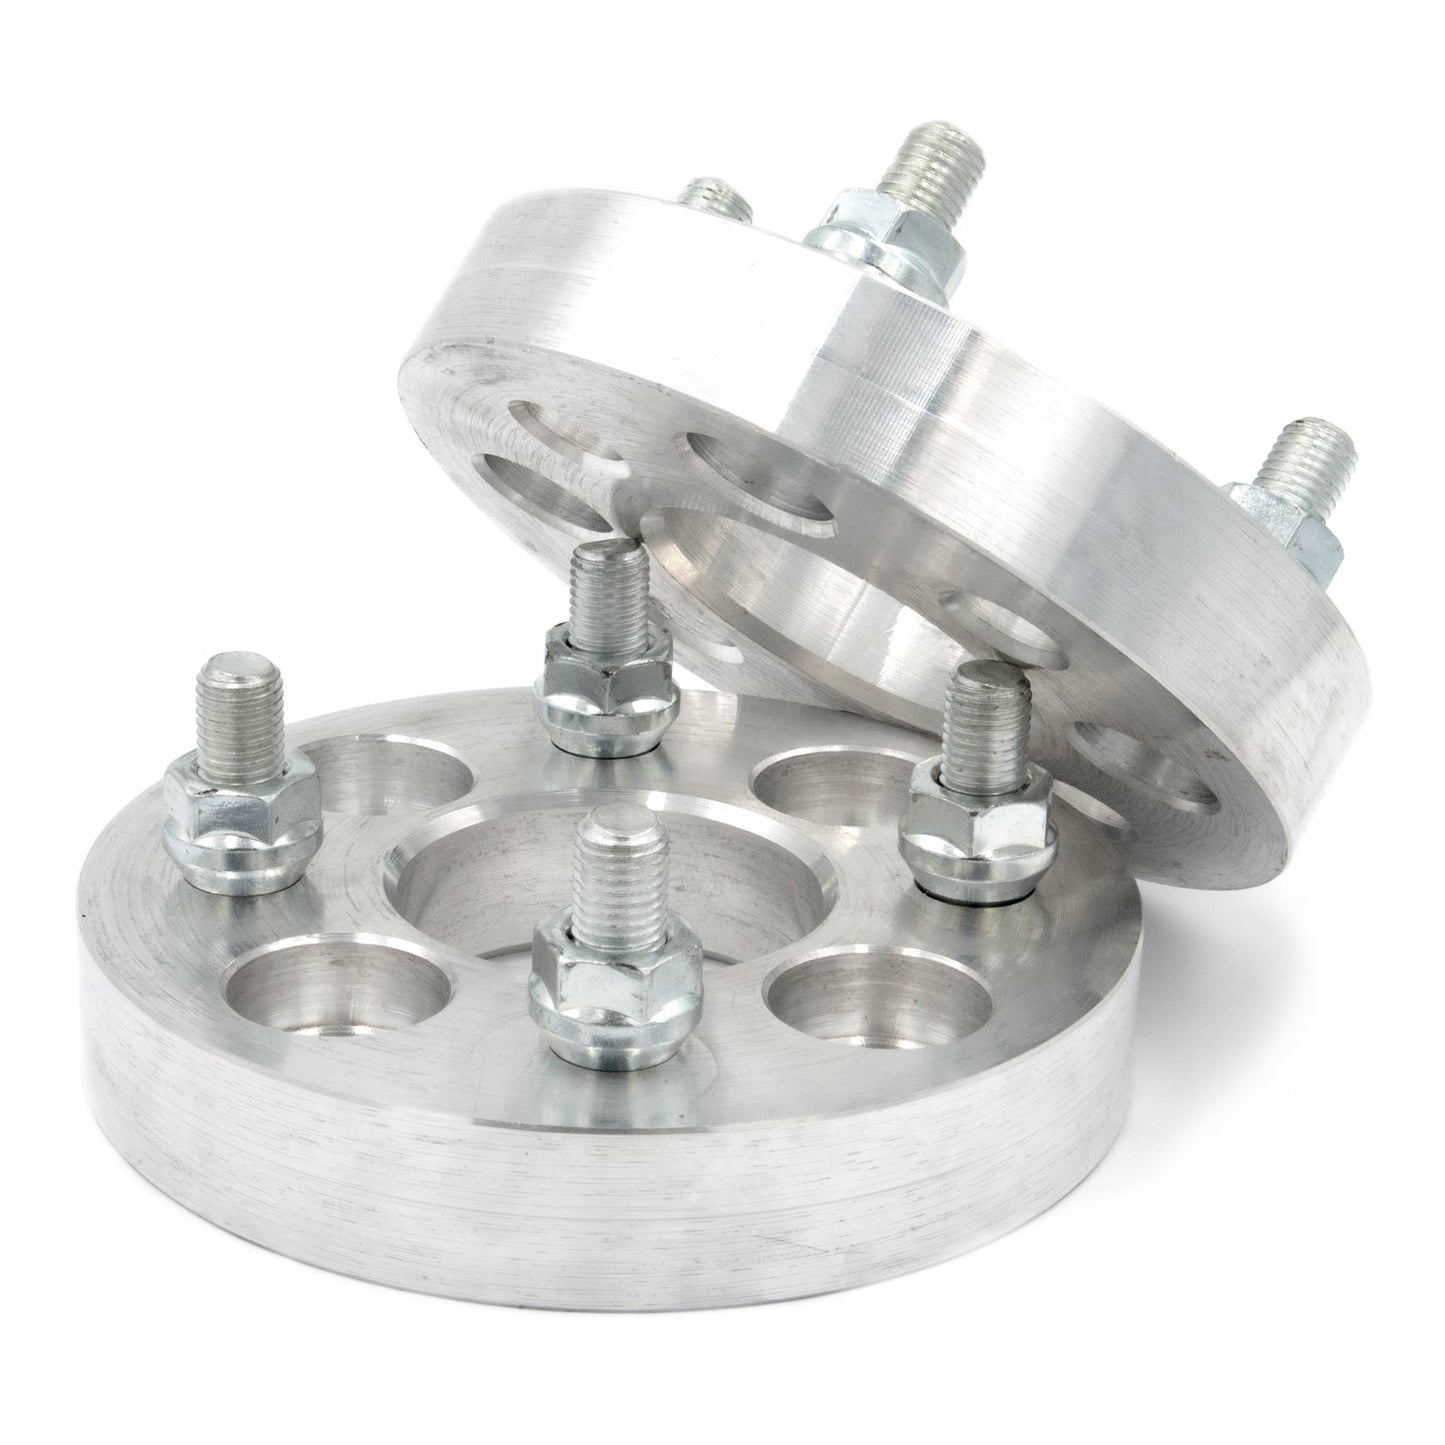 4x4" to 4x4" Wheel Spacer/Adapter - Thickness: 3/4"- 4"